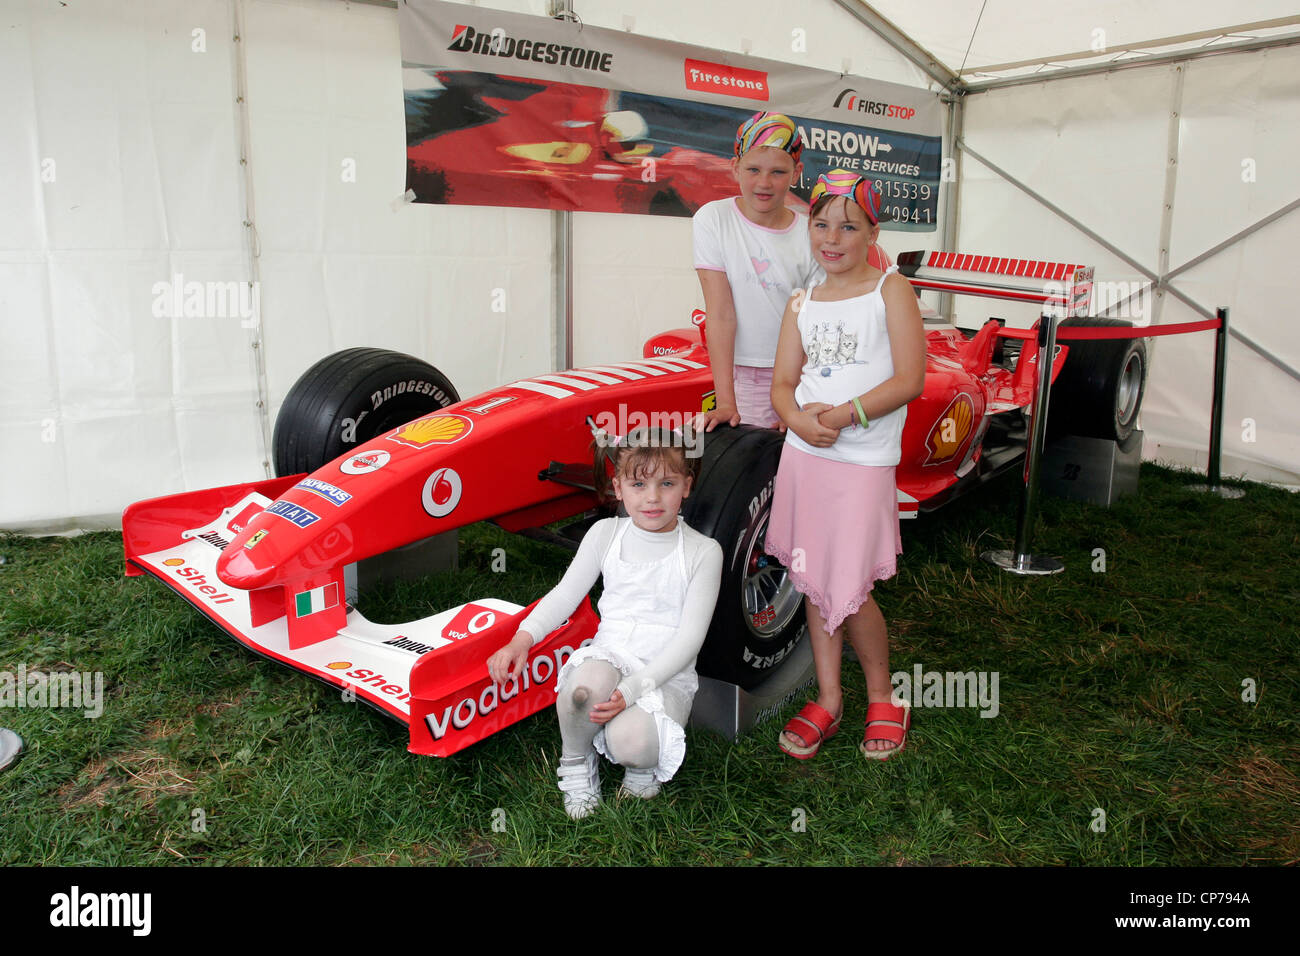 Michael Schumacher's Formula One F1 racing car at the Heddington and Stockley Steam Rally. Stock Photo